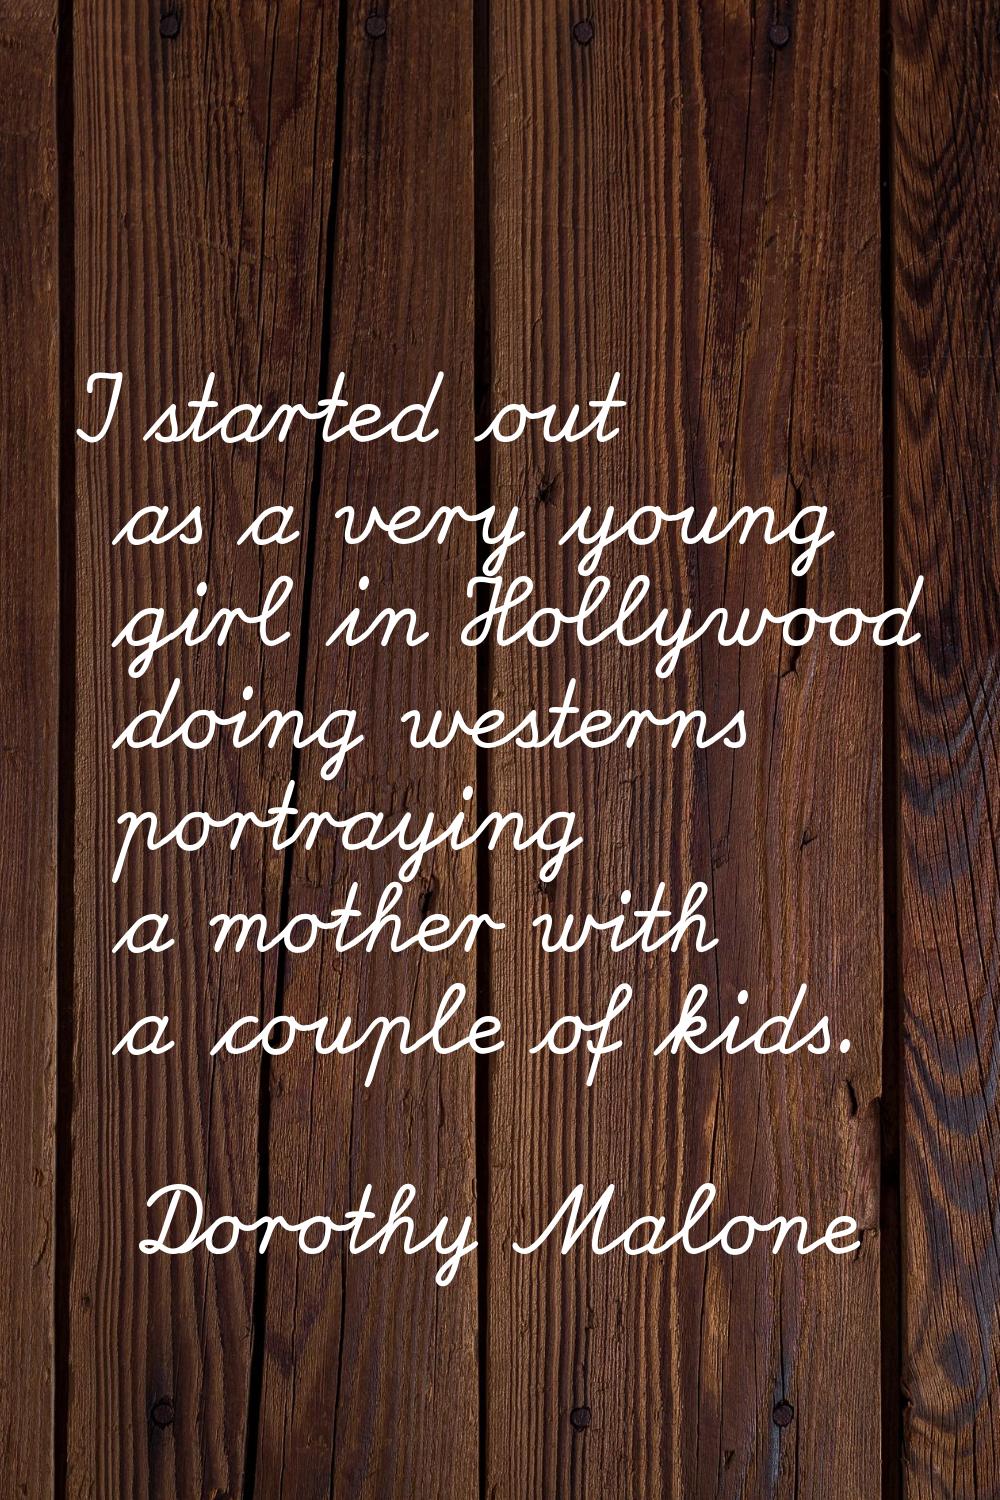 I started out as a very young girl in Hollywood doing westerns portraying a mother with a couple of